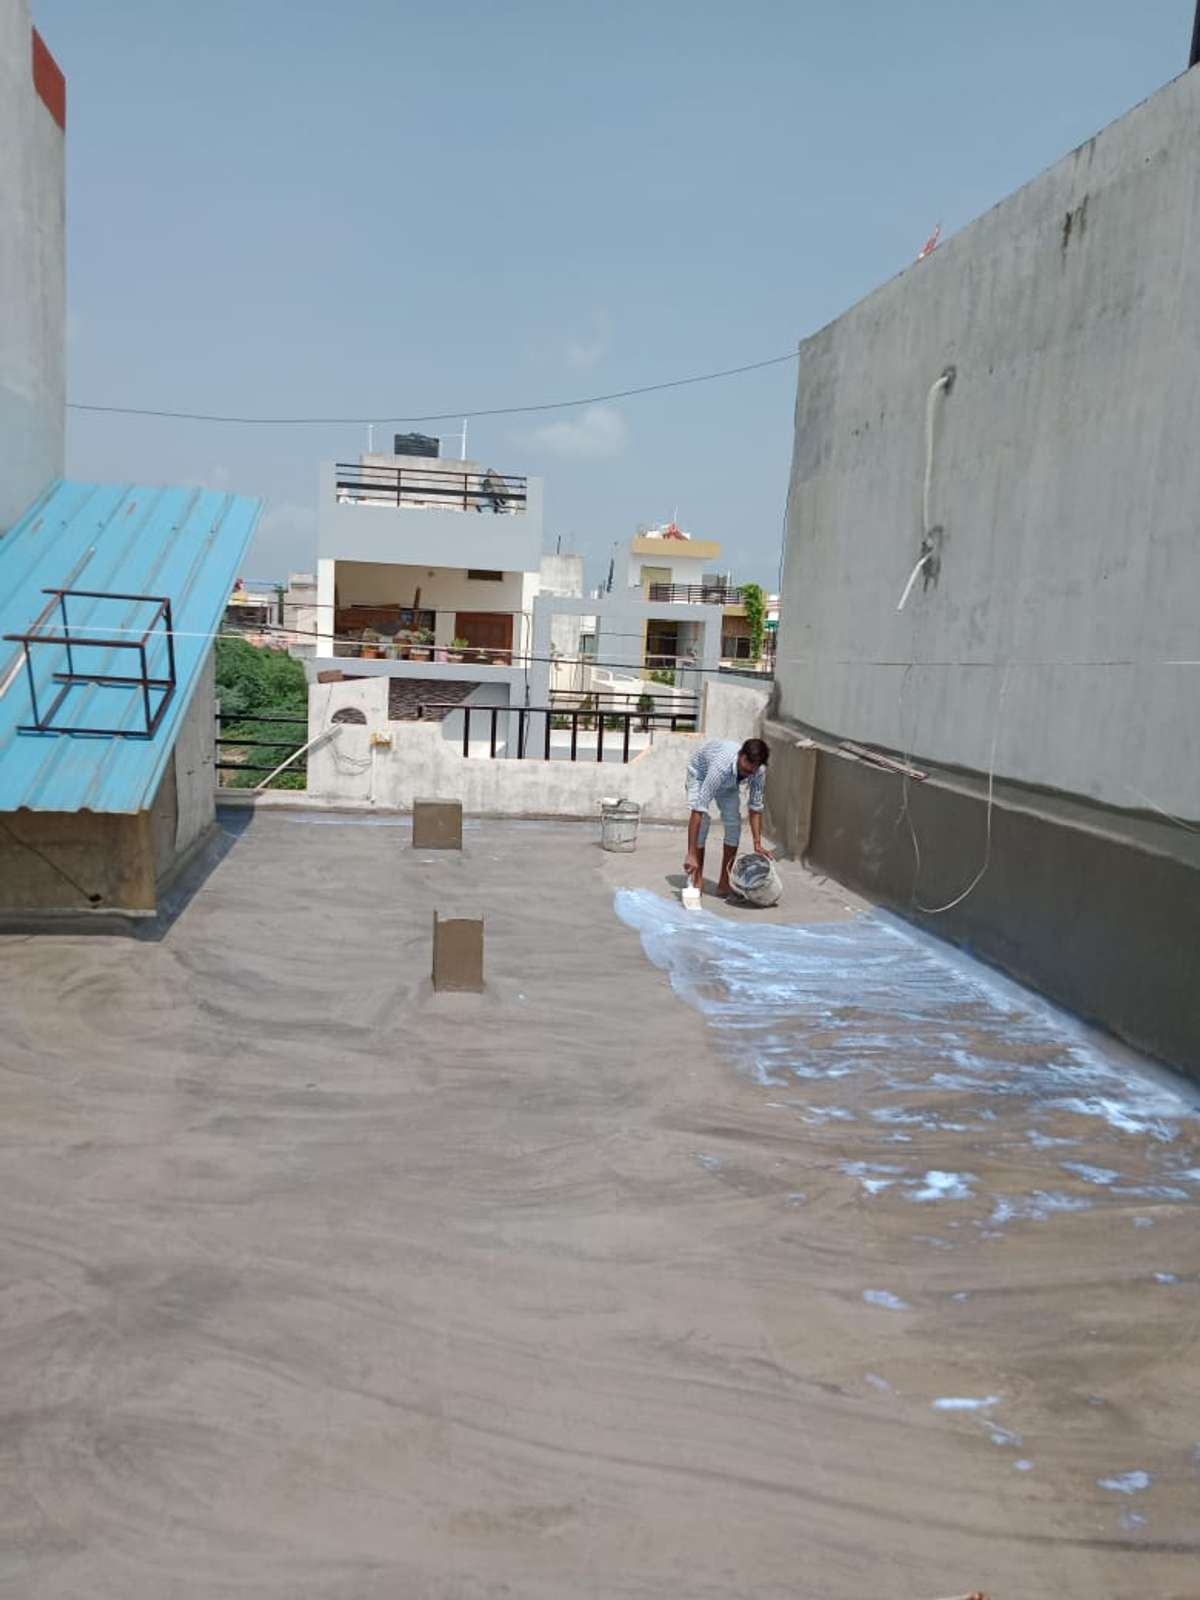 Designs by Water Proofing Hemant Rathore, Indore | Kolo